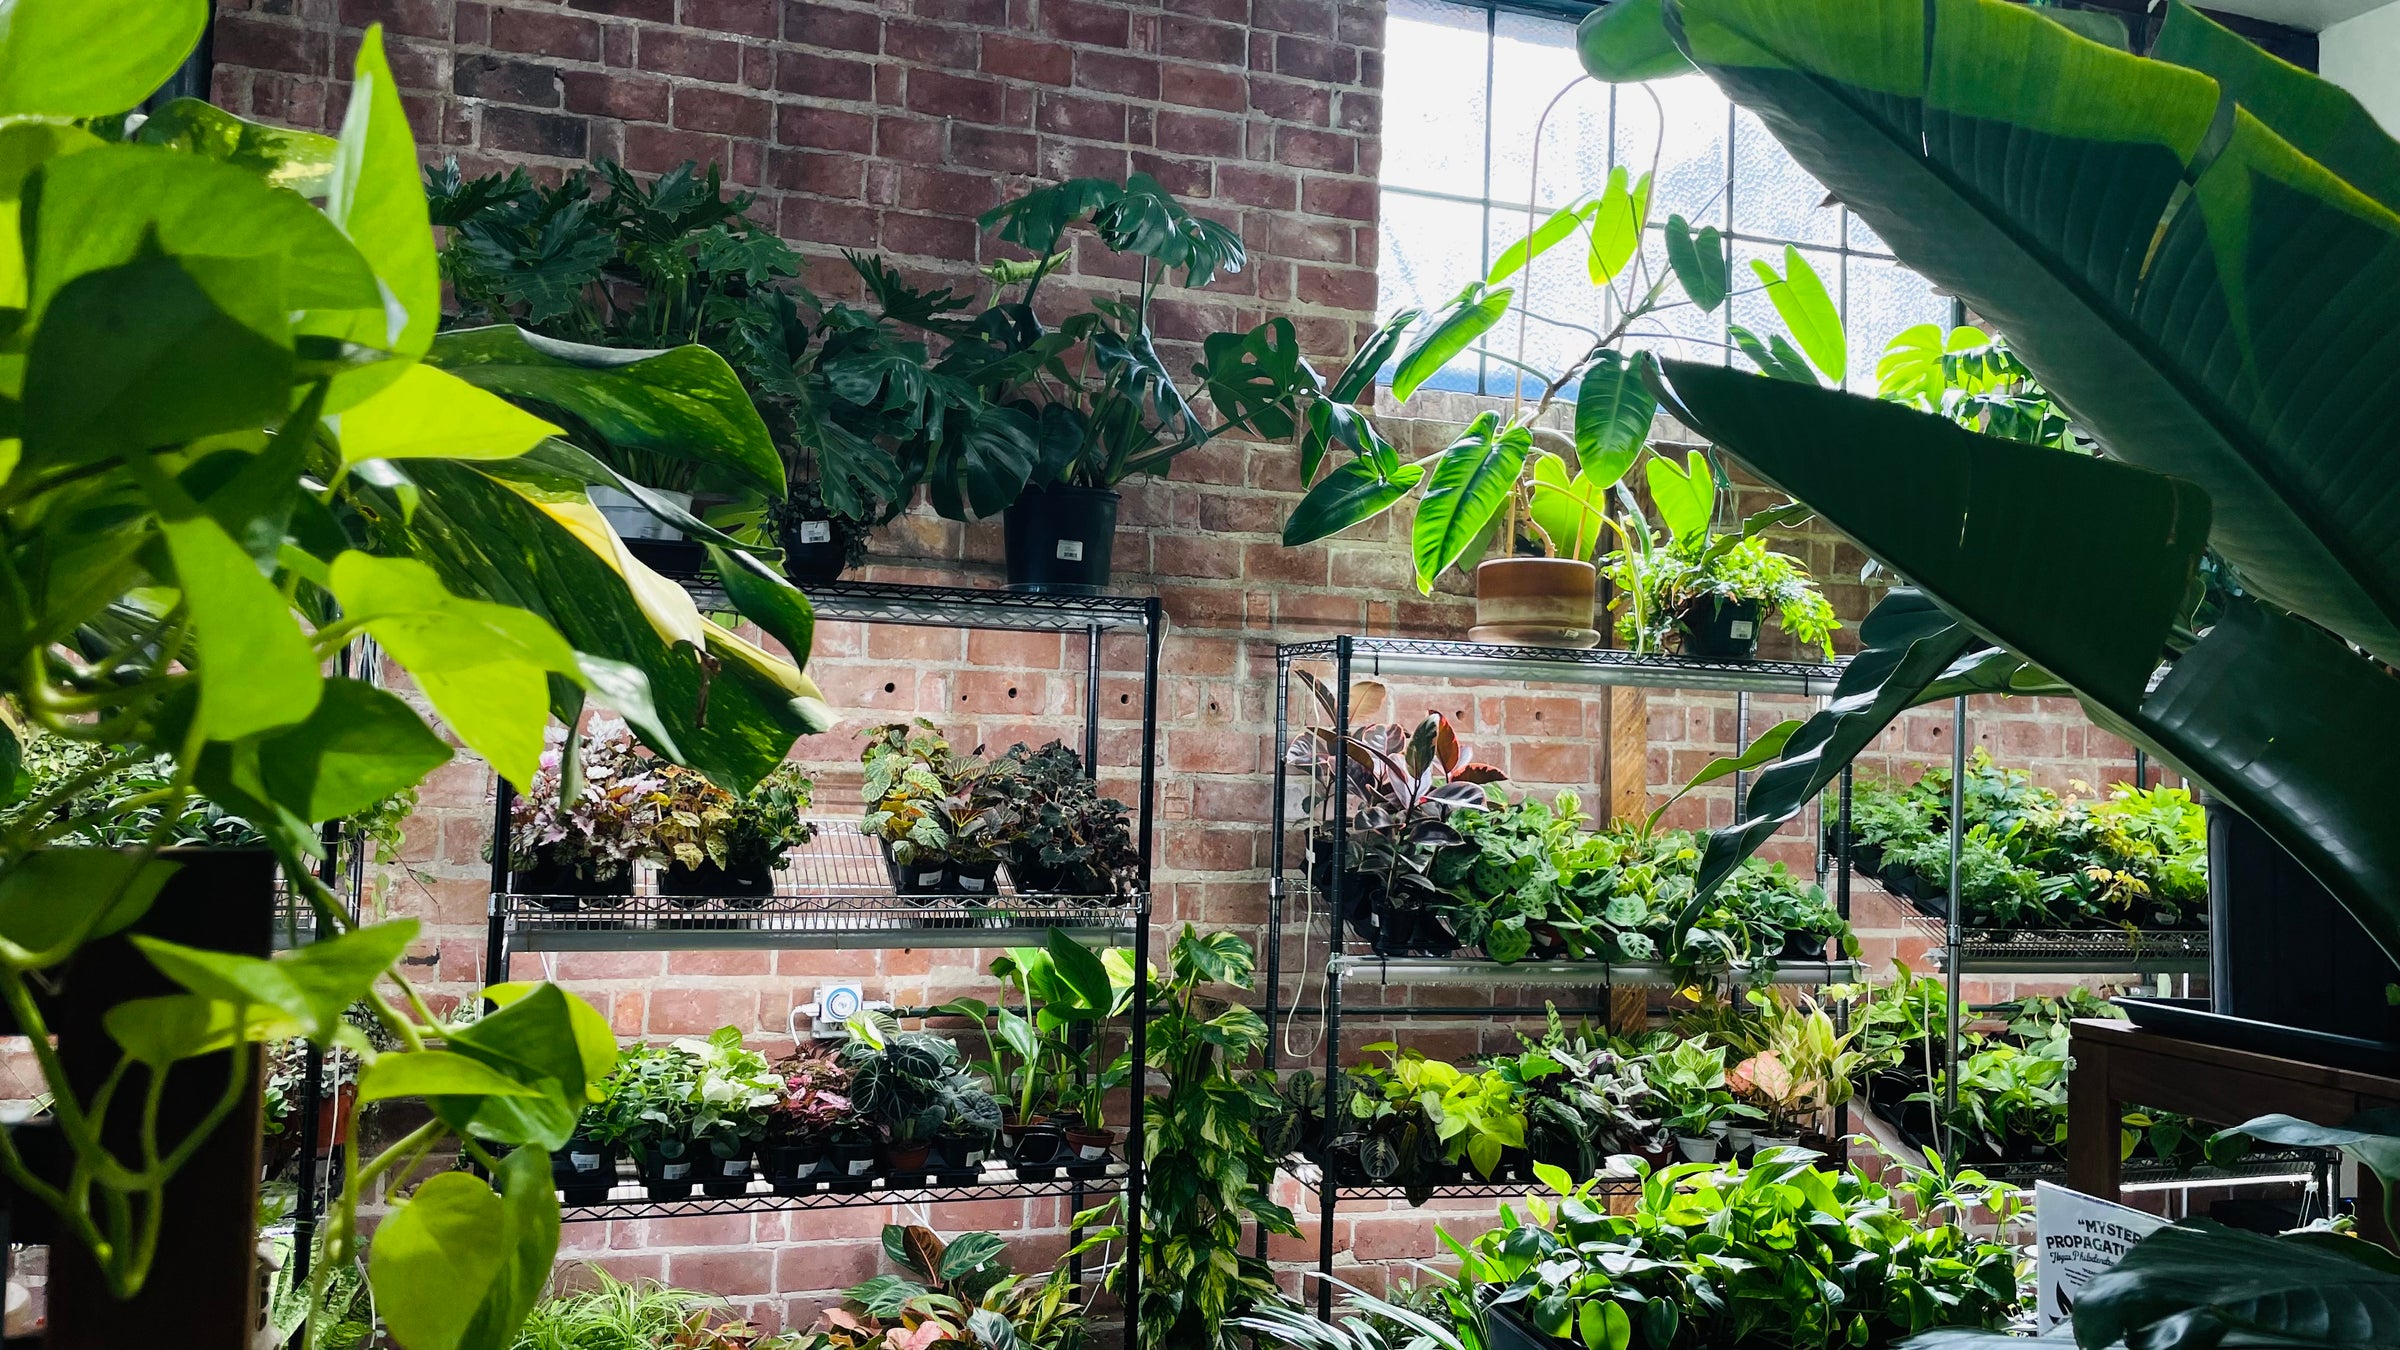 Discover our Upstairs! Houseplants, Homestead supplies, Gifts and More! -  Eastside Urban Farm and Garden Discover our Upstairs! Houseplants,  Homestead Supplies, Gifts and More